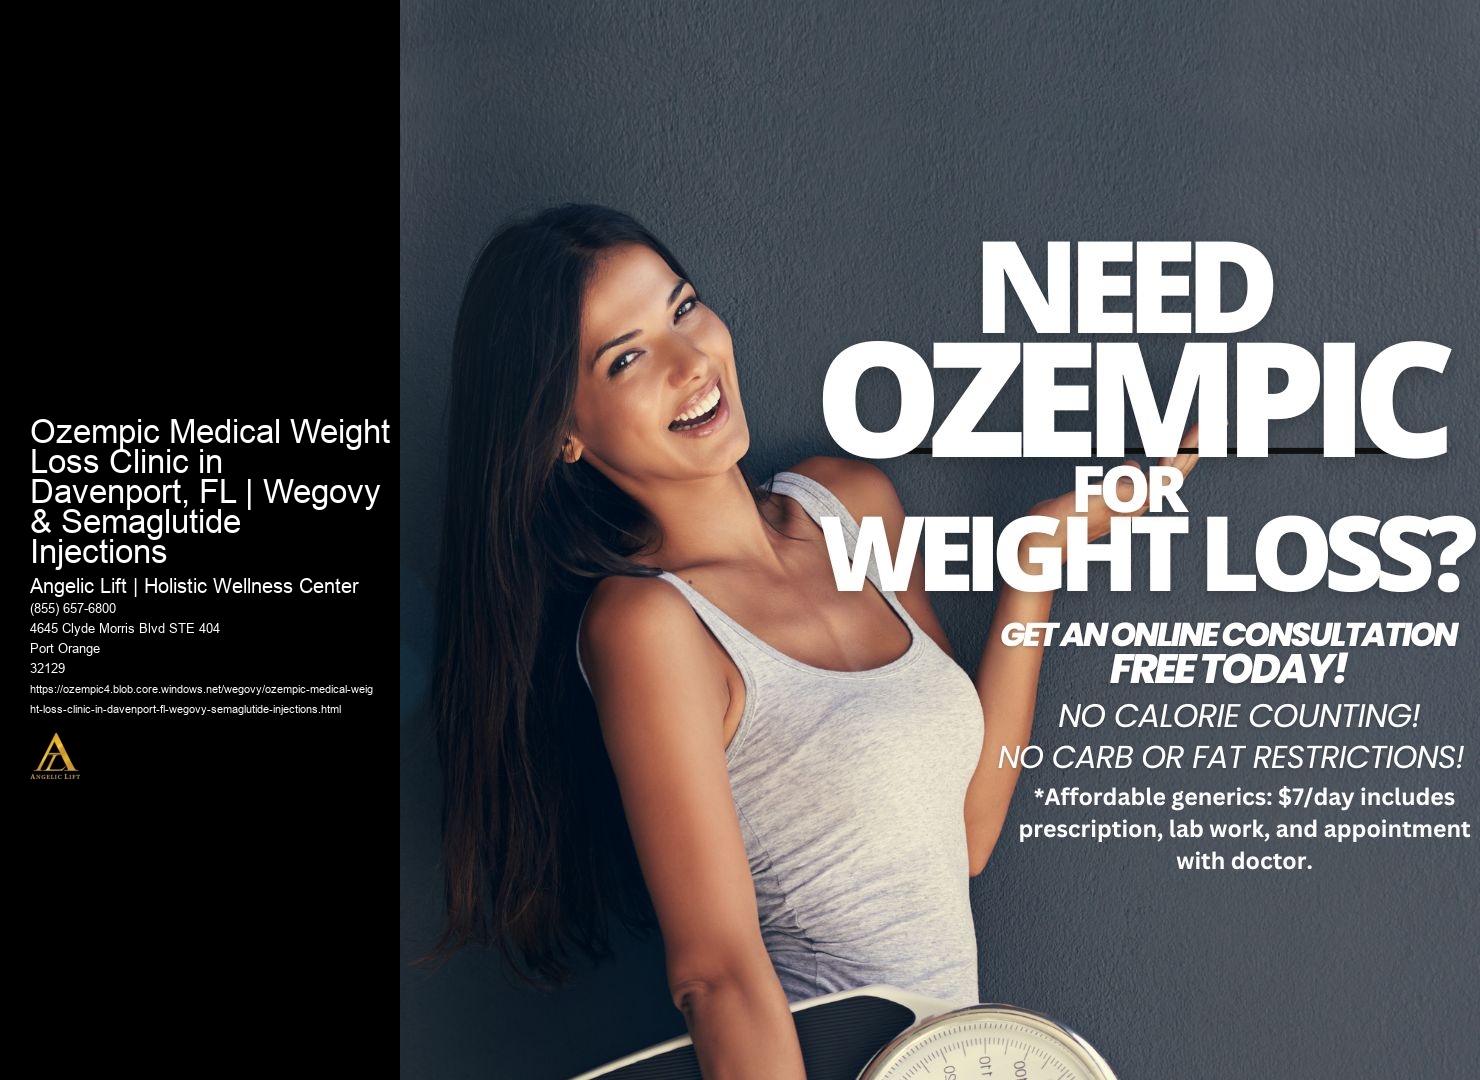 Ozempic Medical Weight Loss Clinic in Davenport, FL | Wegovy & Semaglutide Injections